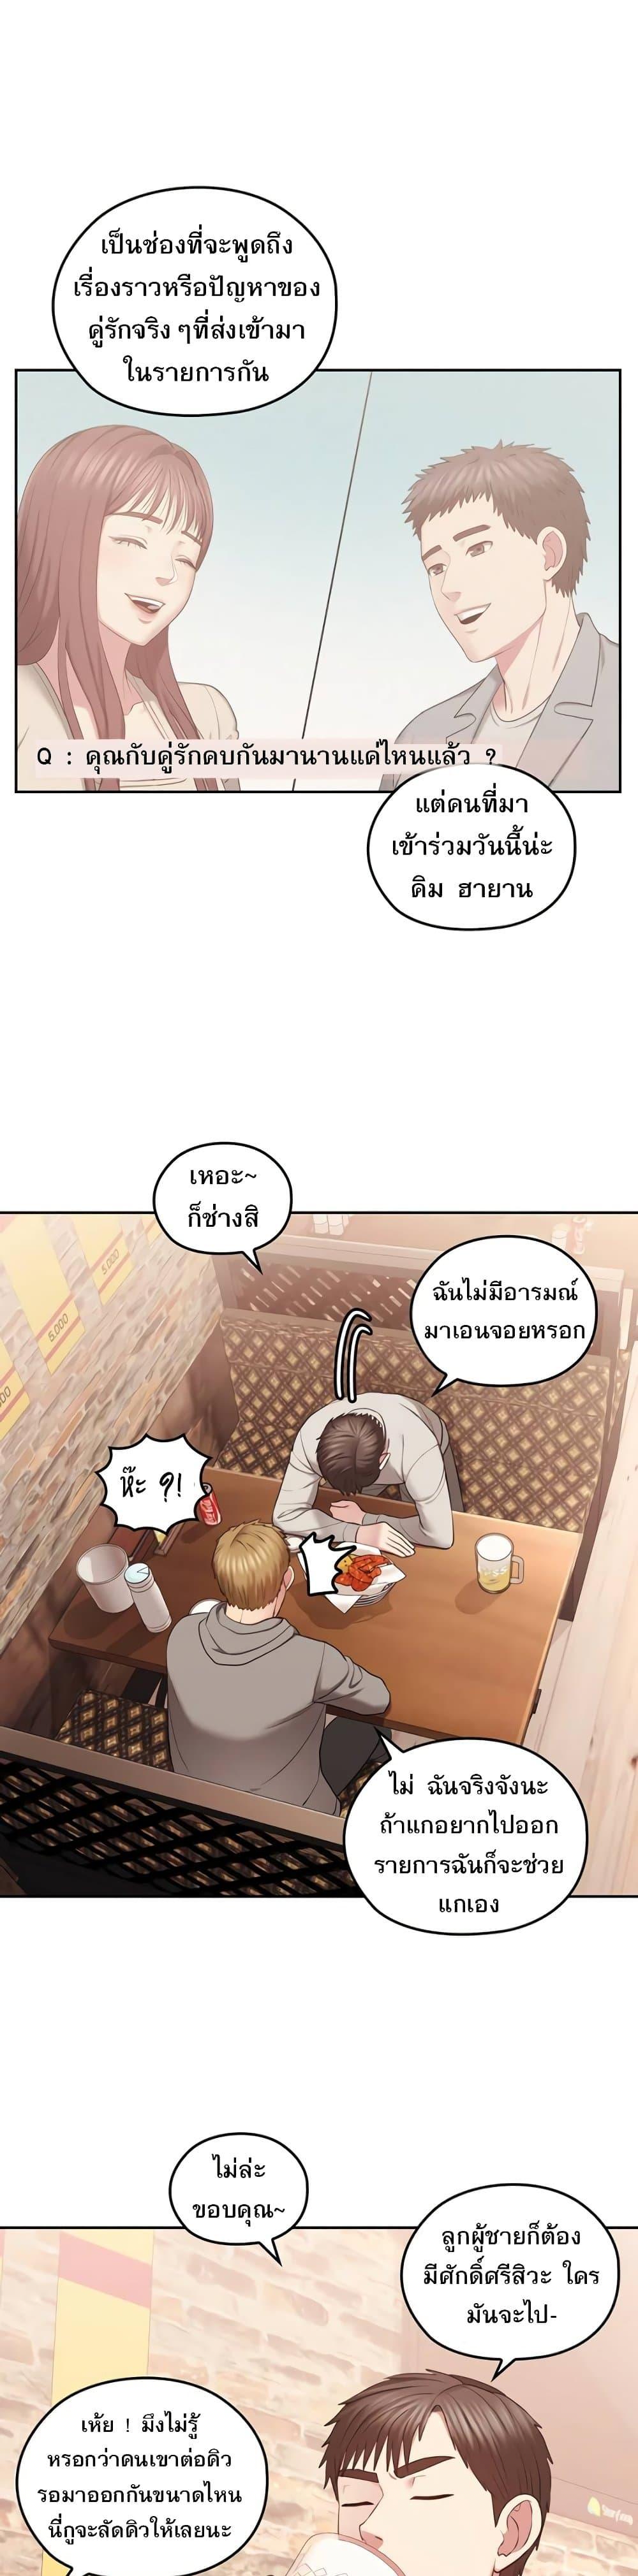 Sexual Consulting 2 ภาพ 18